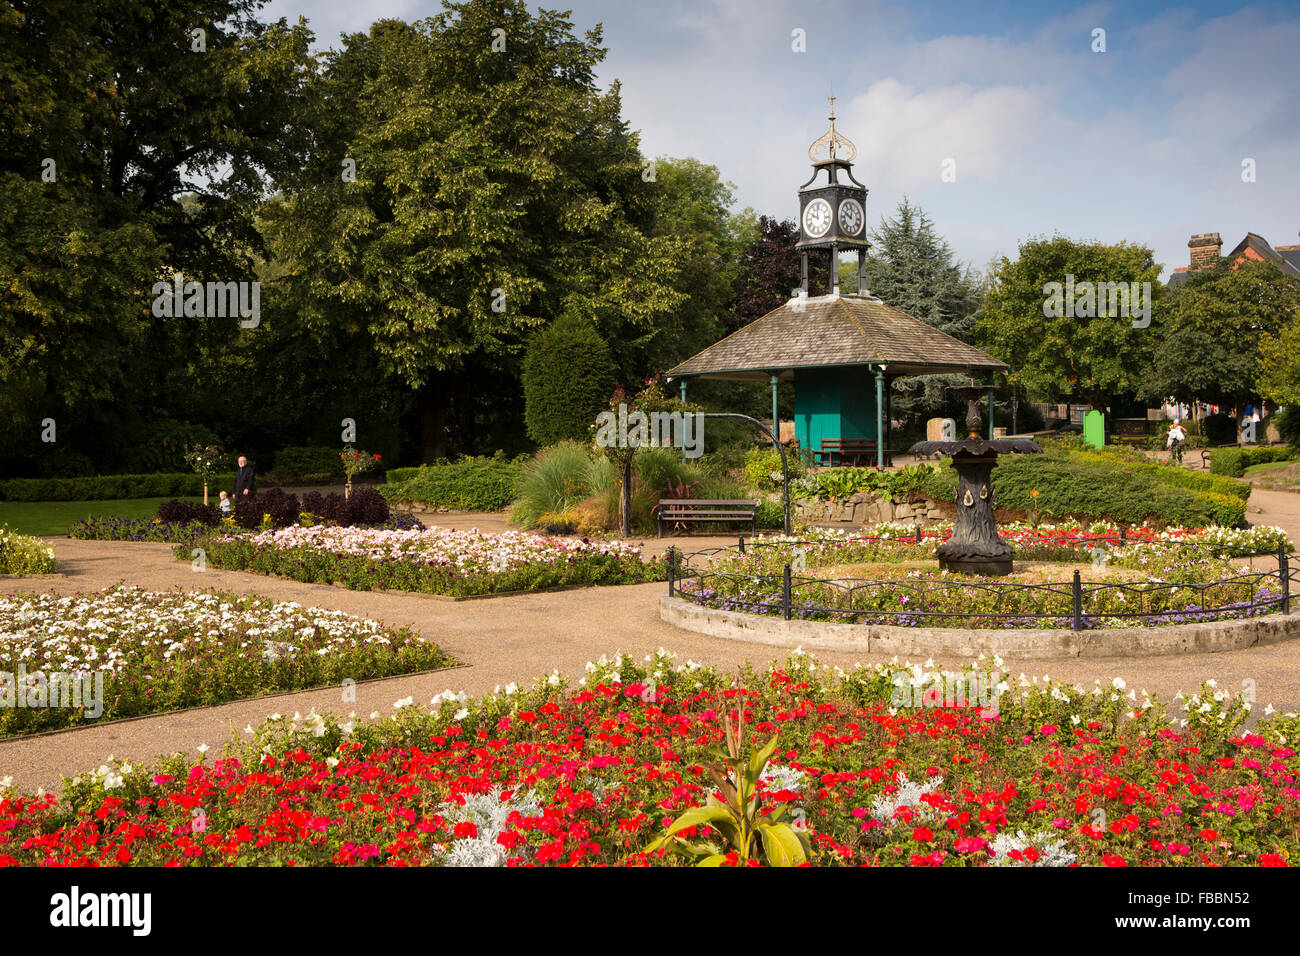 UK, England, Derbyshire, Matlock, Hall Leys Park, floral beds planted around the Old Tram Shelter Stock Photo